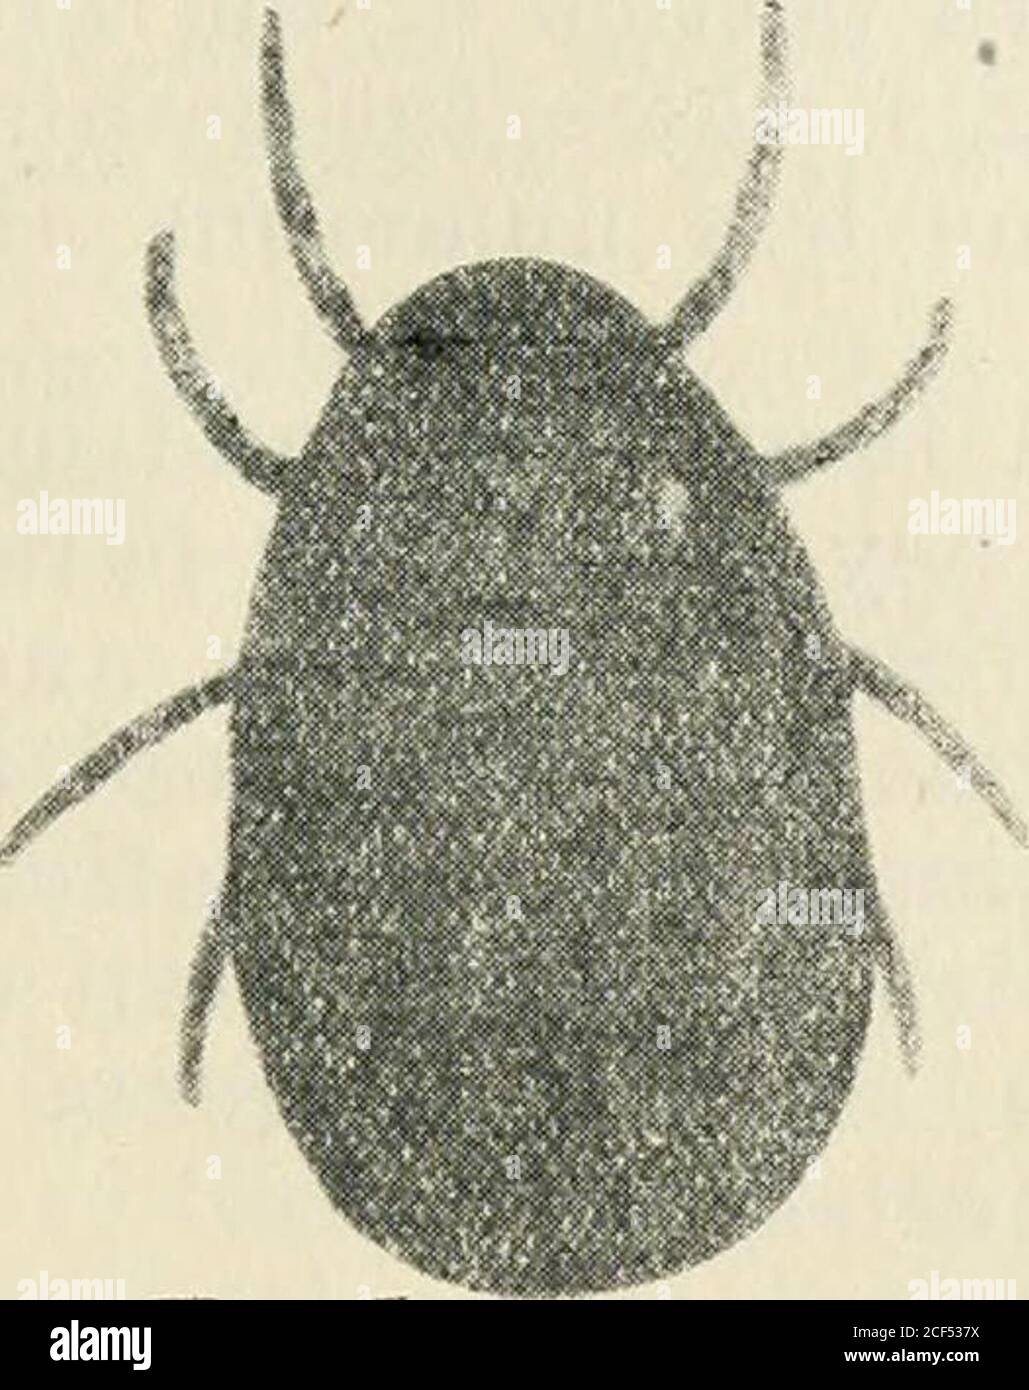 . Journal of the Department of Agriculture, Union of South Africa. smits African Relapsing Fever or Tick Feverto man in Central and East Africa, the Congo Free State, and Angola,and has also been proved experimentally to be able to transmitSpirochaeta inarchouxi to fowls. The lAfe Cycle is as follows:—The females lay their eggs inbatches in sand or hollows in the ground excavated by the females.The total number of eggs laid by a single female varies from about90 to 150. The larva develops inside the &g^, and the young nymphahatches out in eight to twenty-three days. • The first stage nympha is Stock Photo